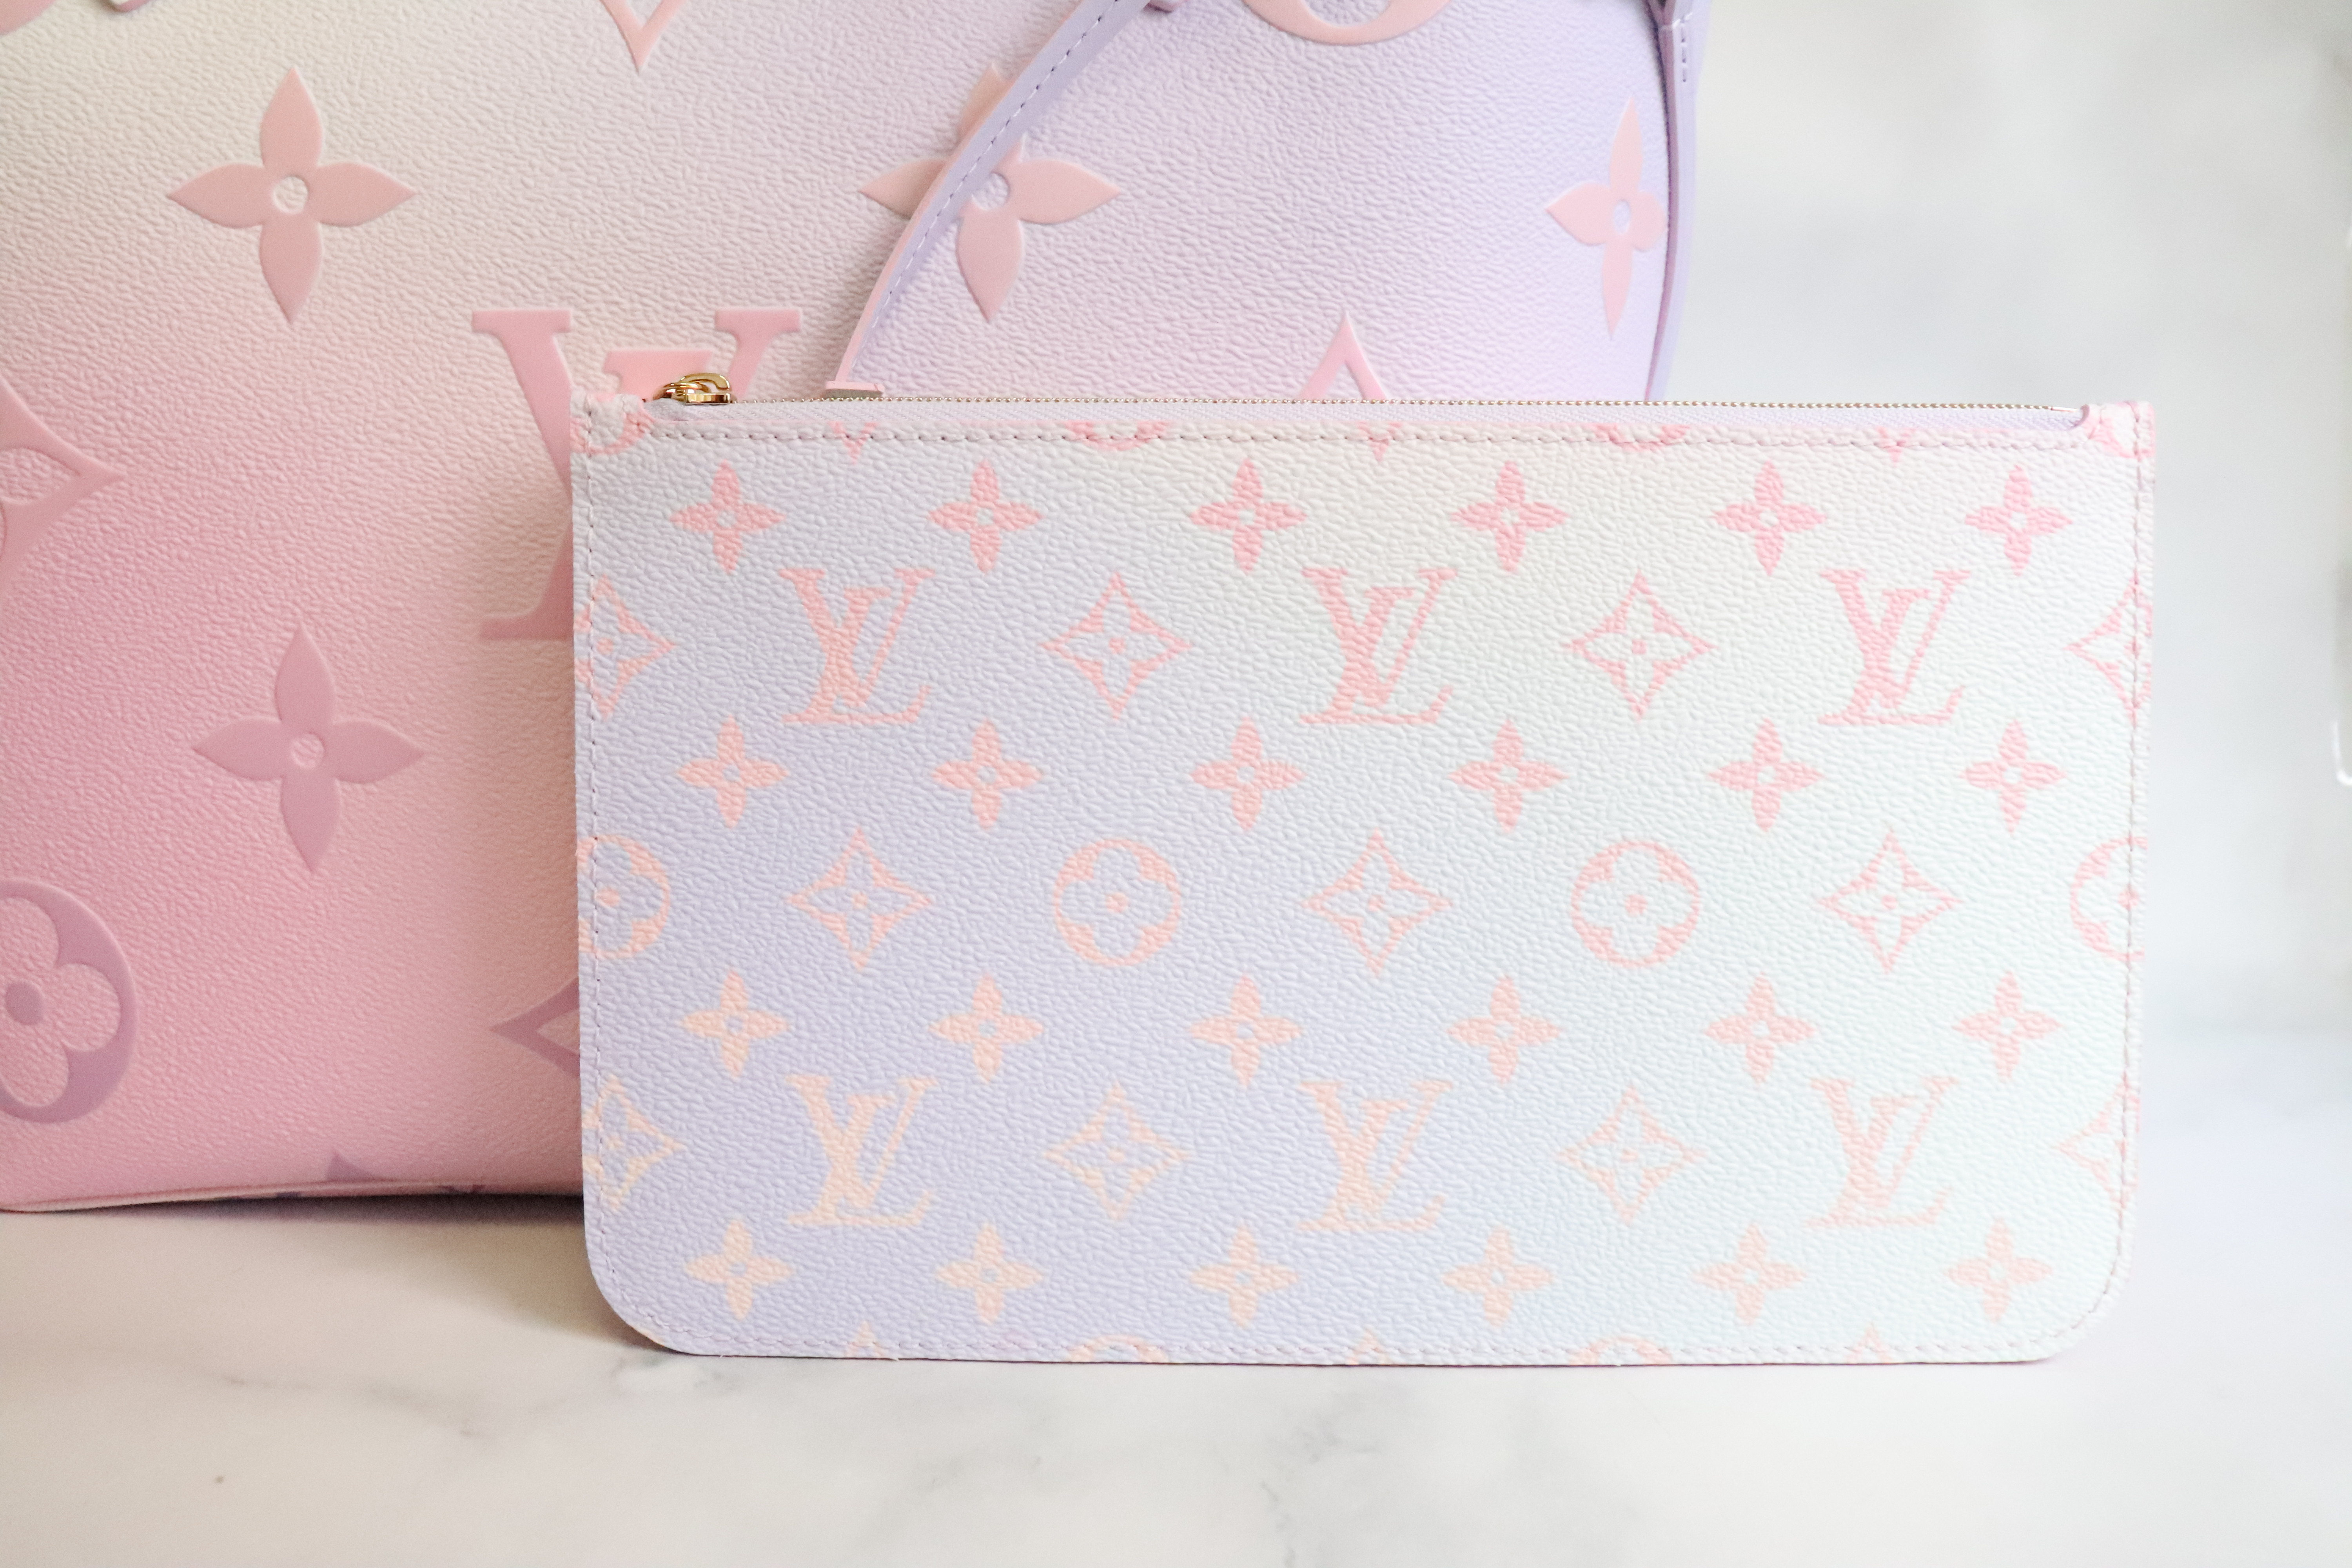 Louis Vuitton Neverfull MM, Sunrise Pastel Color, New in Dustbag P